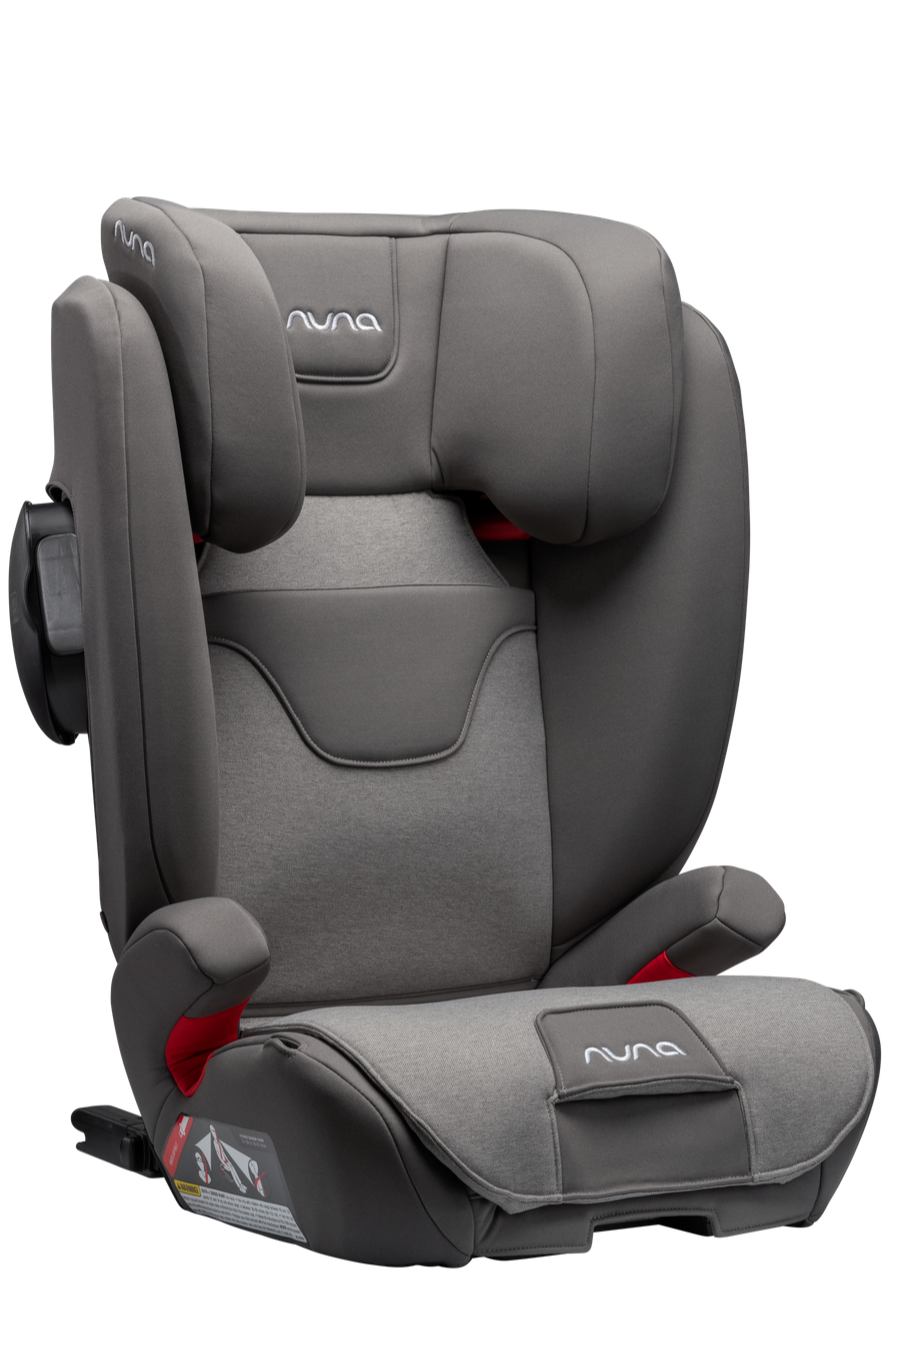 NUNA AACE 2-in-1 Booster Car Seat  with Granite item- ANB Baby -$100 - $300